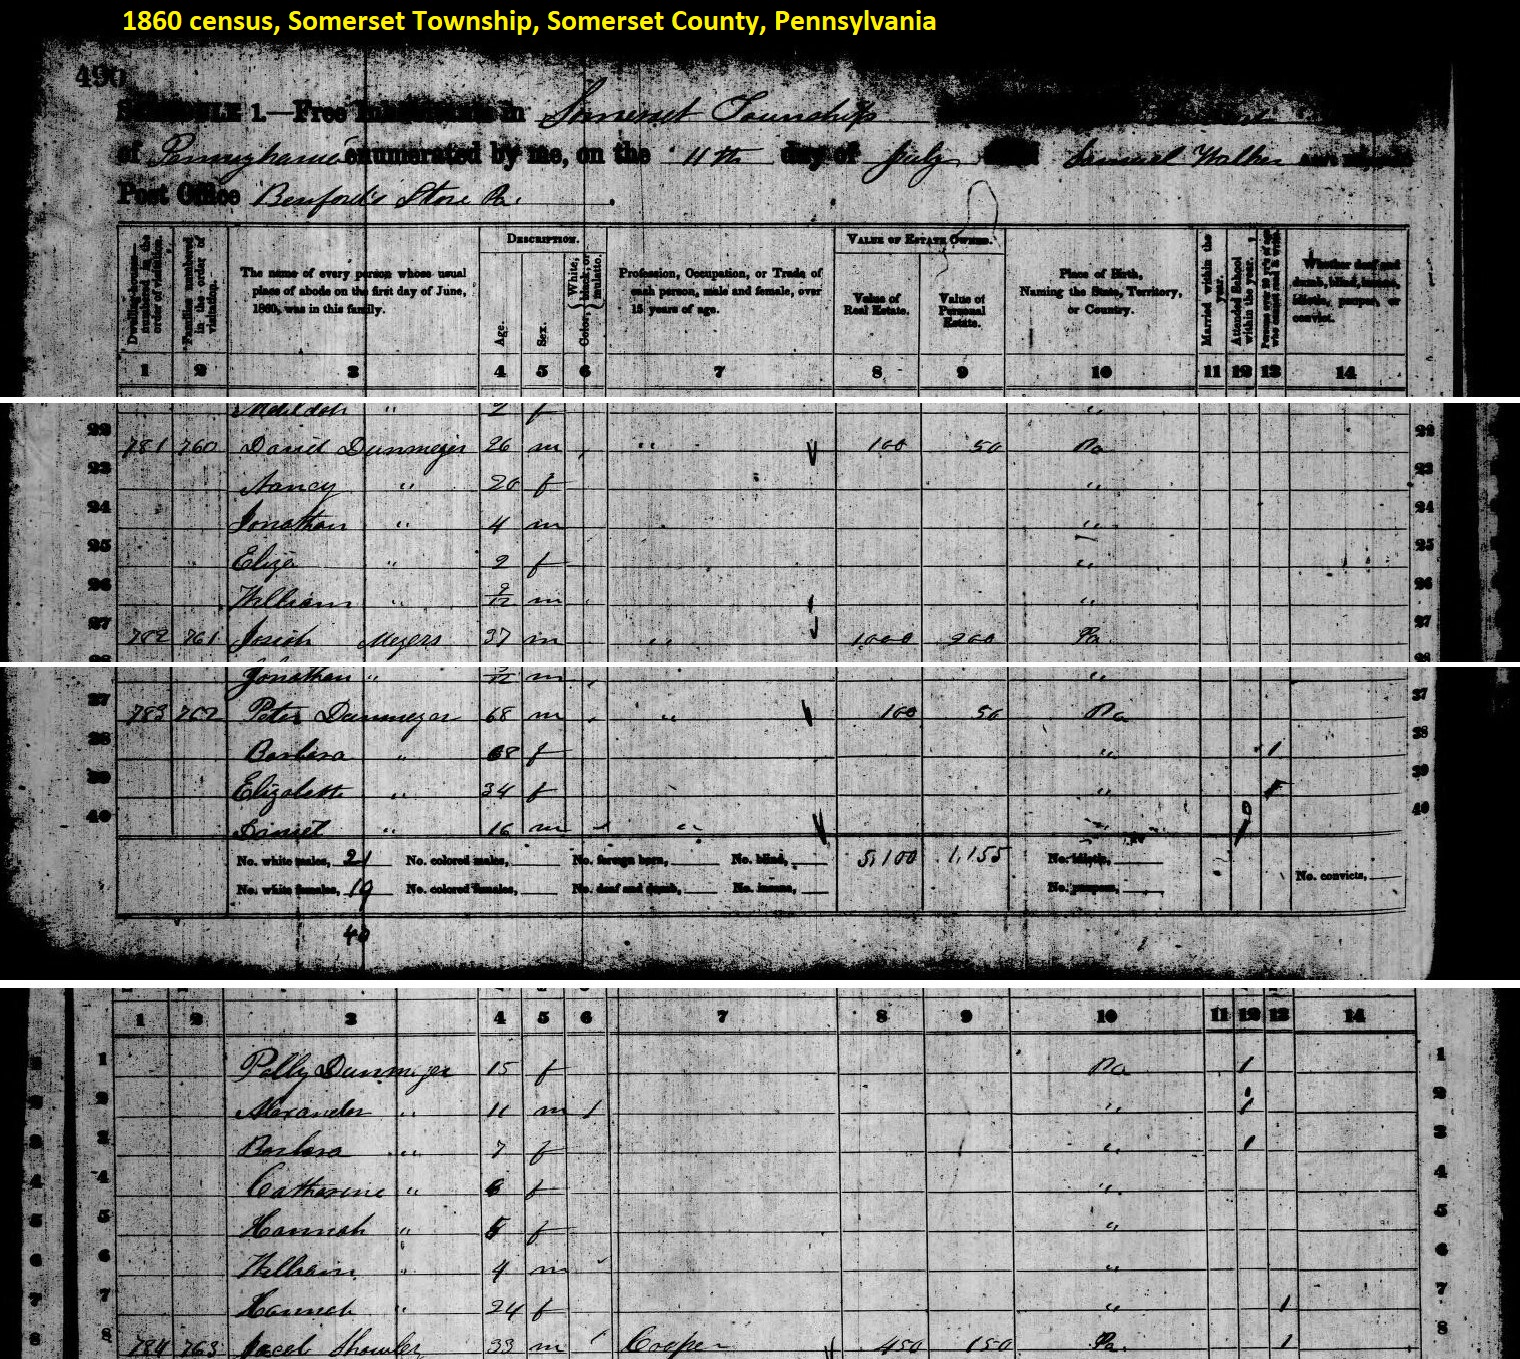 In the 1860 census of Somerset Township, Peter Dormayer and David Dunmyer are listed near one-another. 